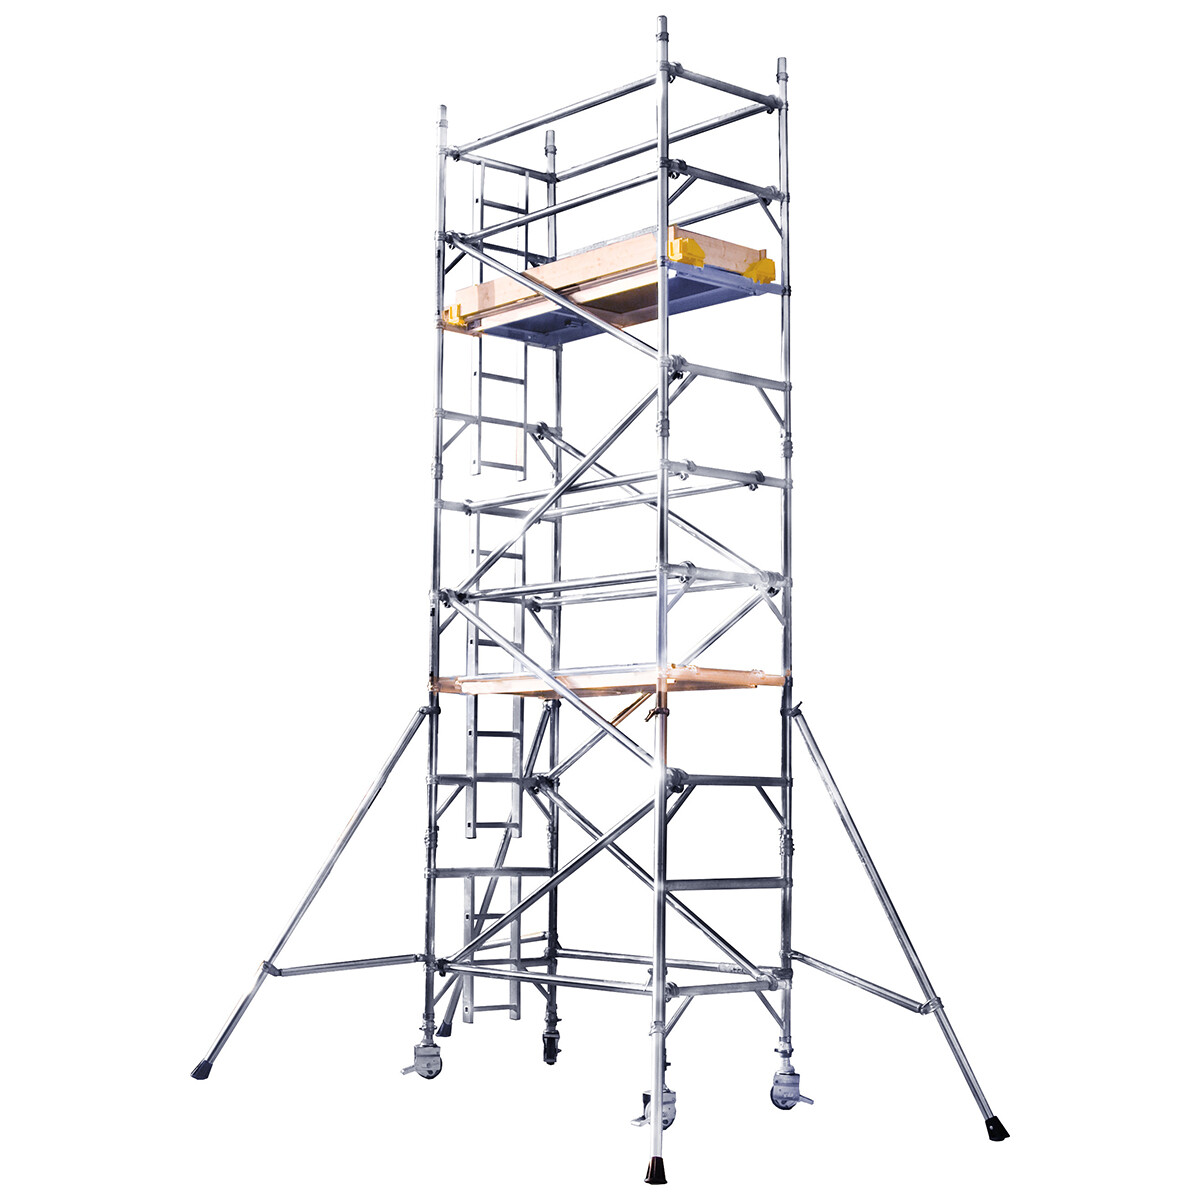 Narrow Span Mobile Tower - 0.85m wide x 8.3m high